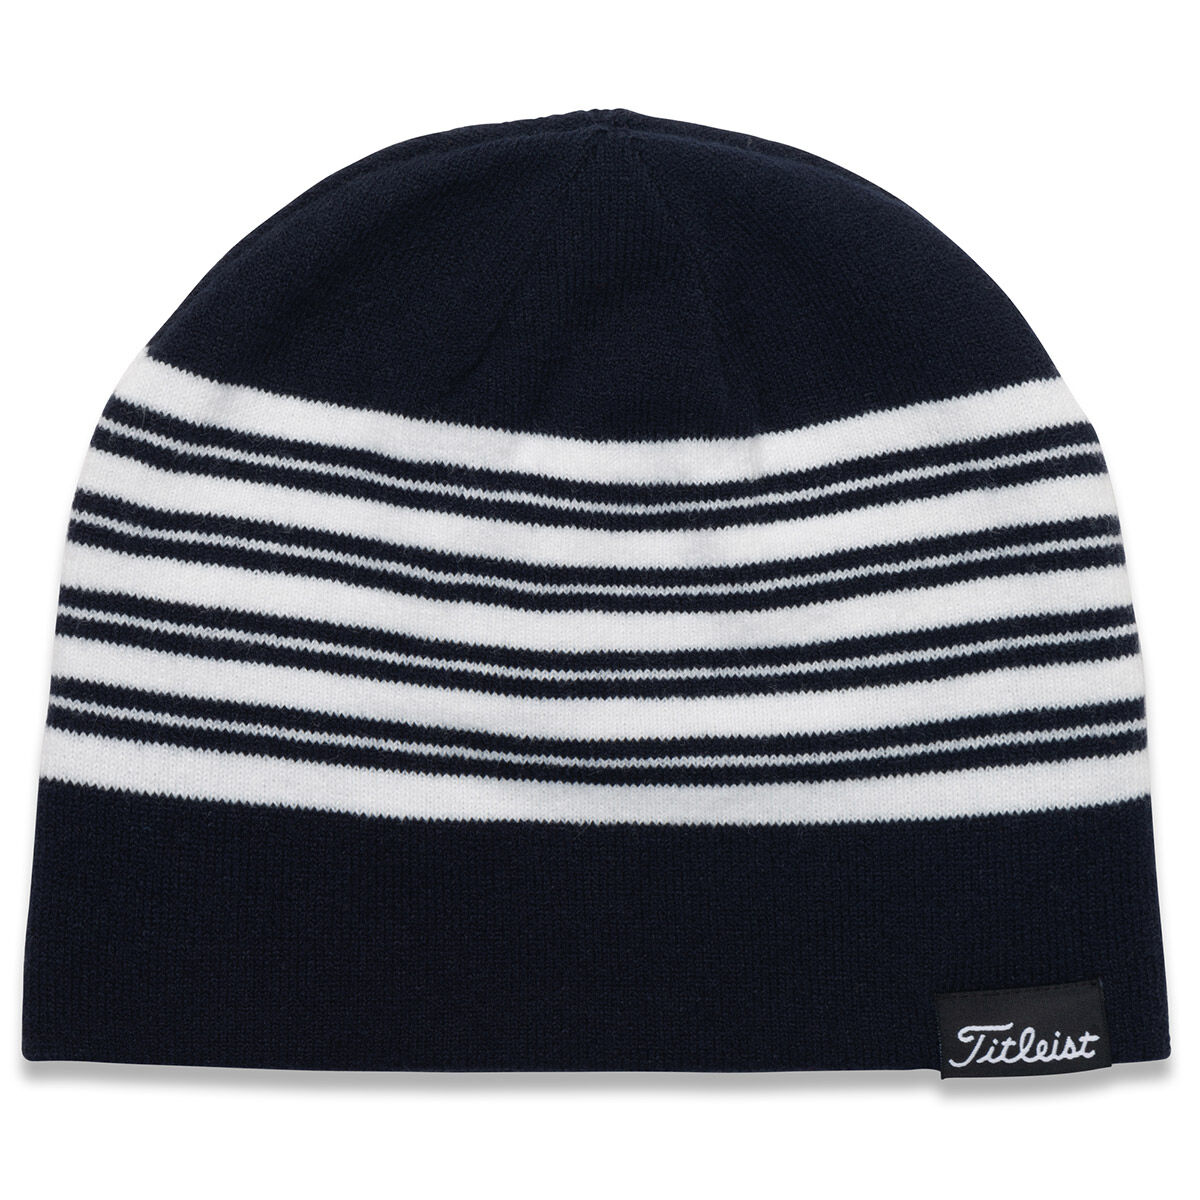 Titleist Navy Blue and White Lifestyle Reversible Beanie Hat, One Size | American Golf - Father's Day Gift von Titleist